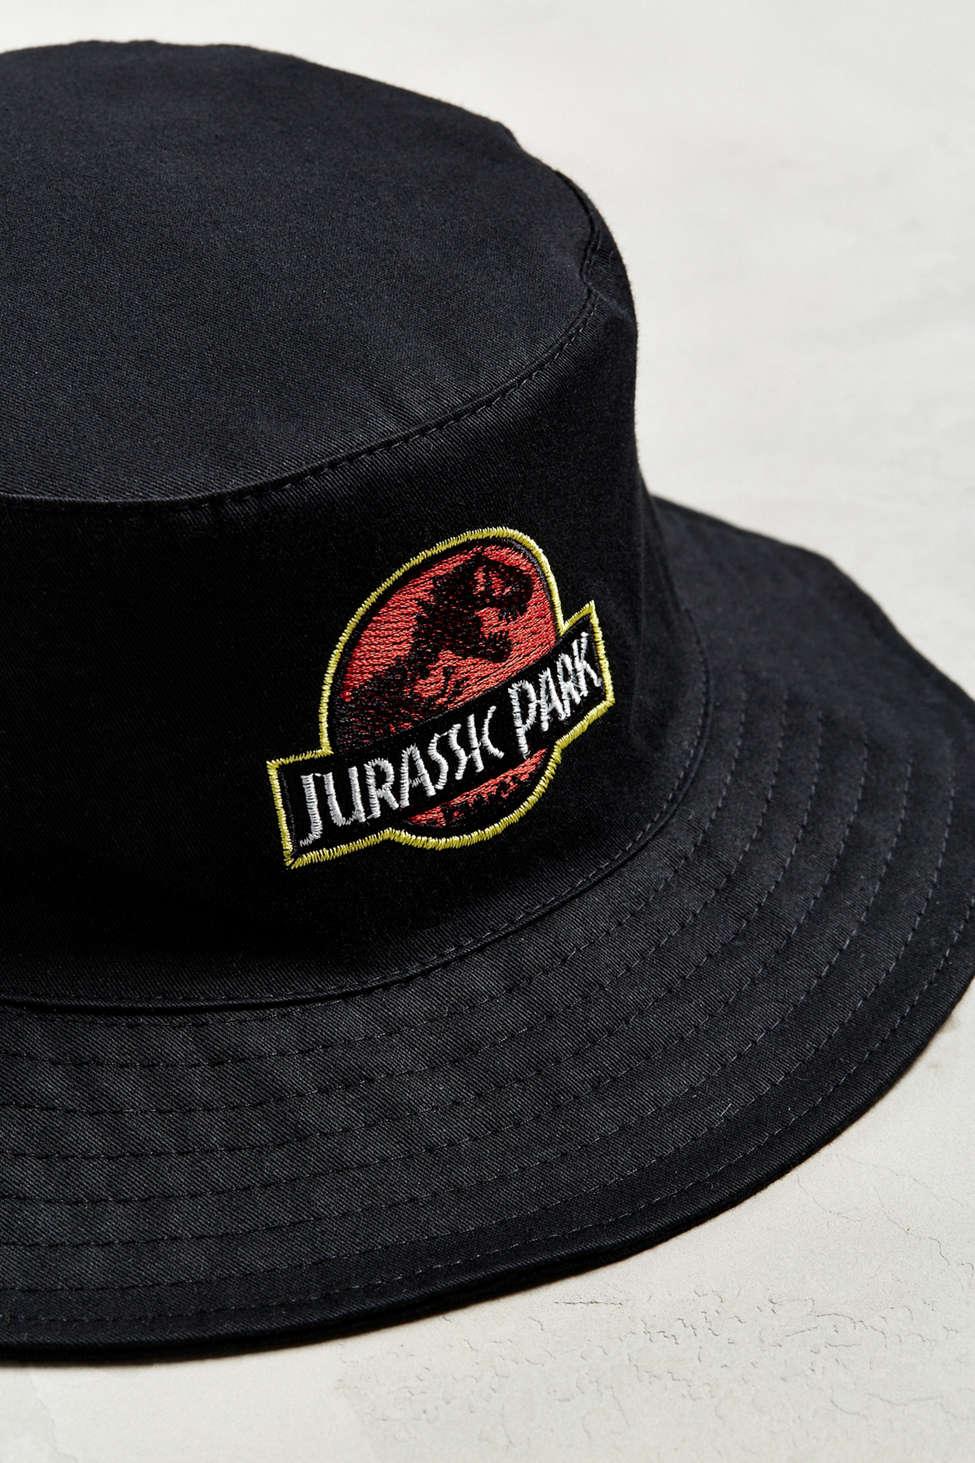 Urban Outfitters Cotton Jurassic Park Bucket Hat in Black for Men - Lyst